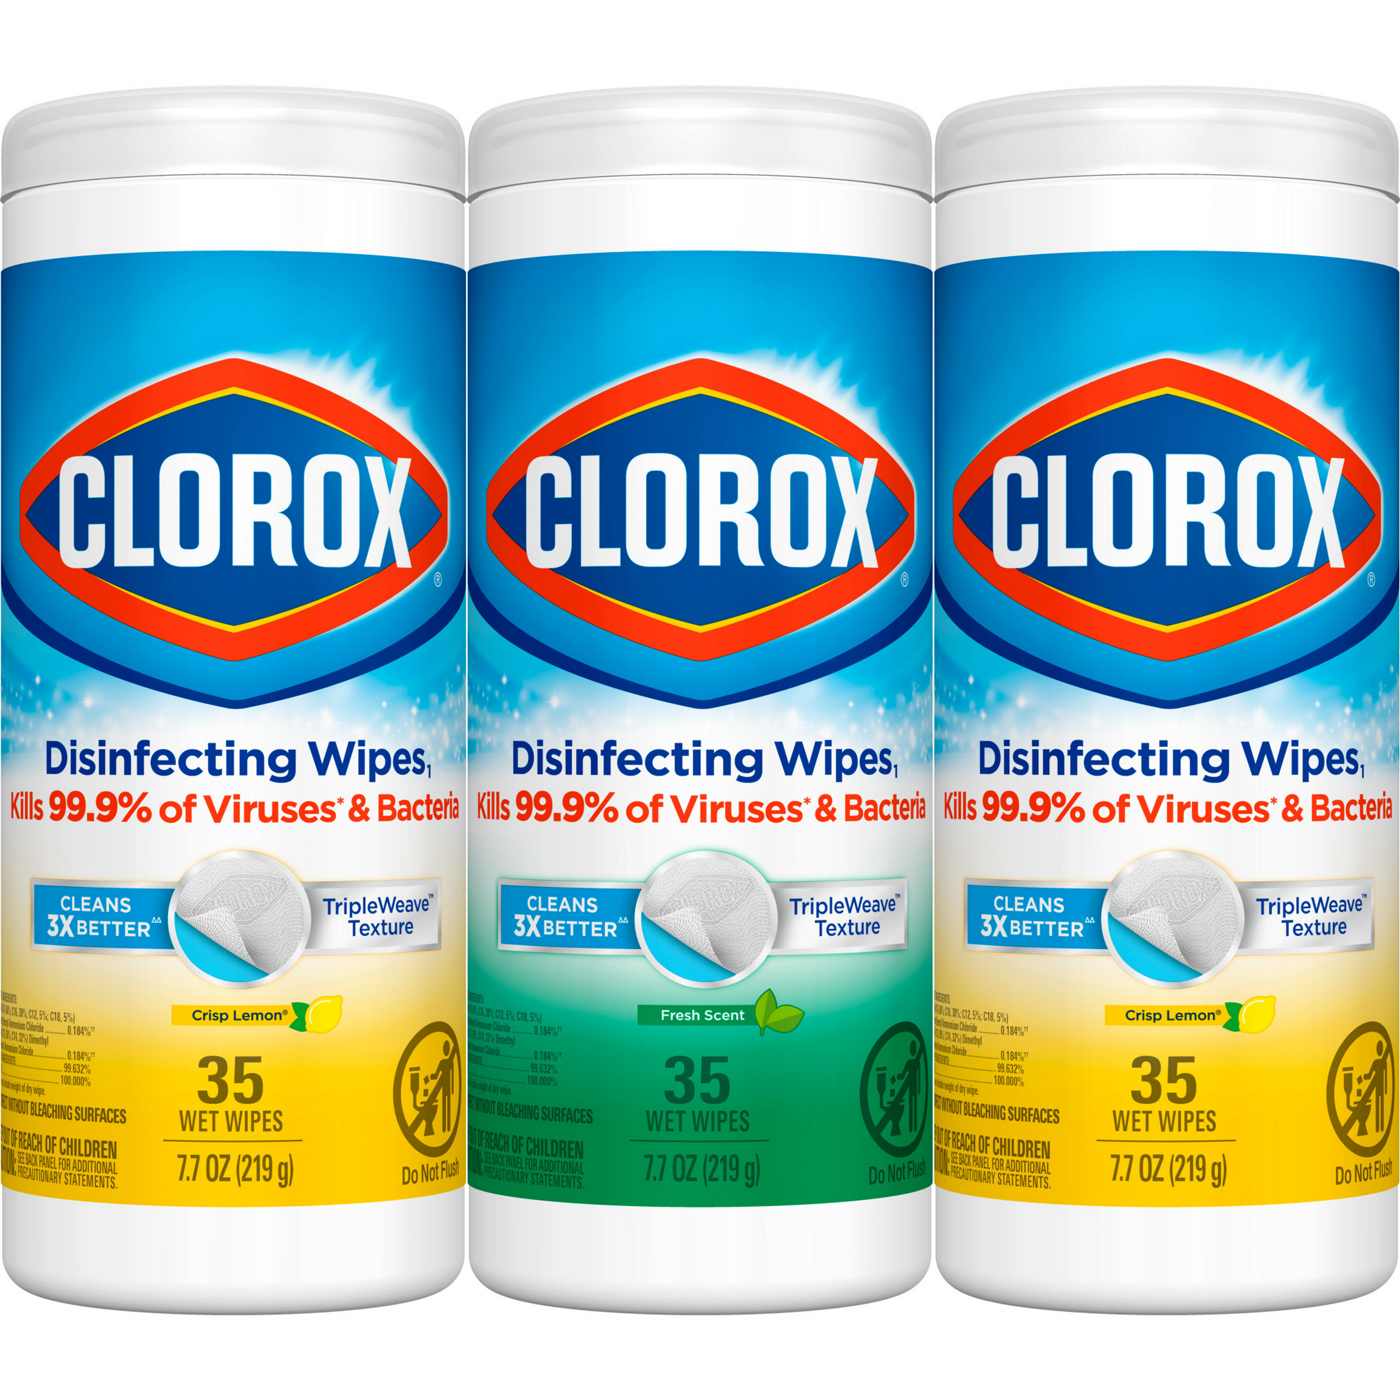 Clorox Disinfecting Wipes Value Pack, 3 pack; image 1 of 8